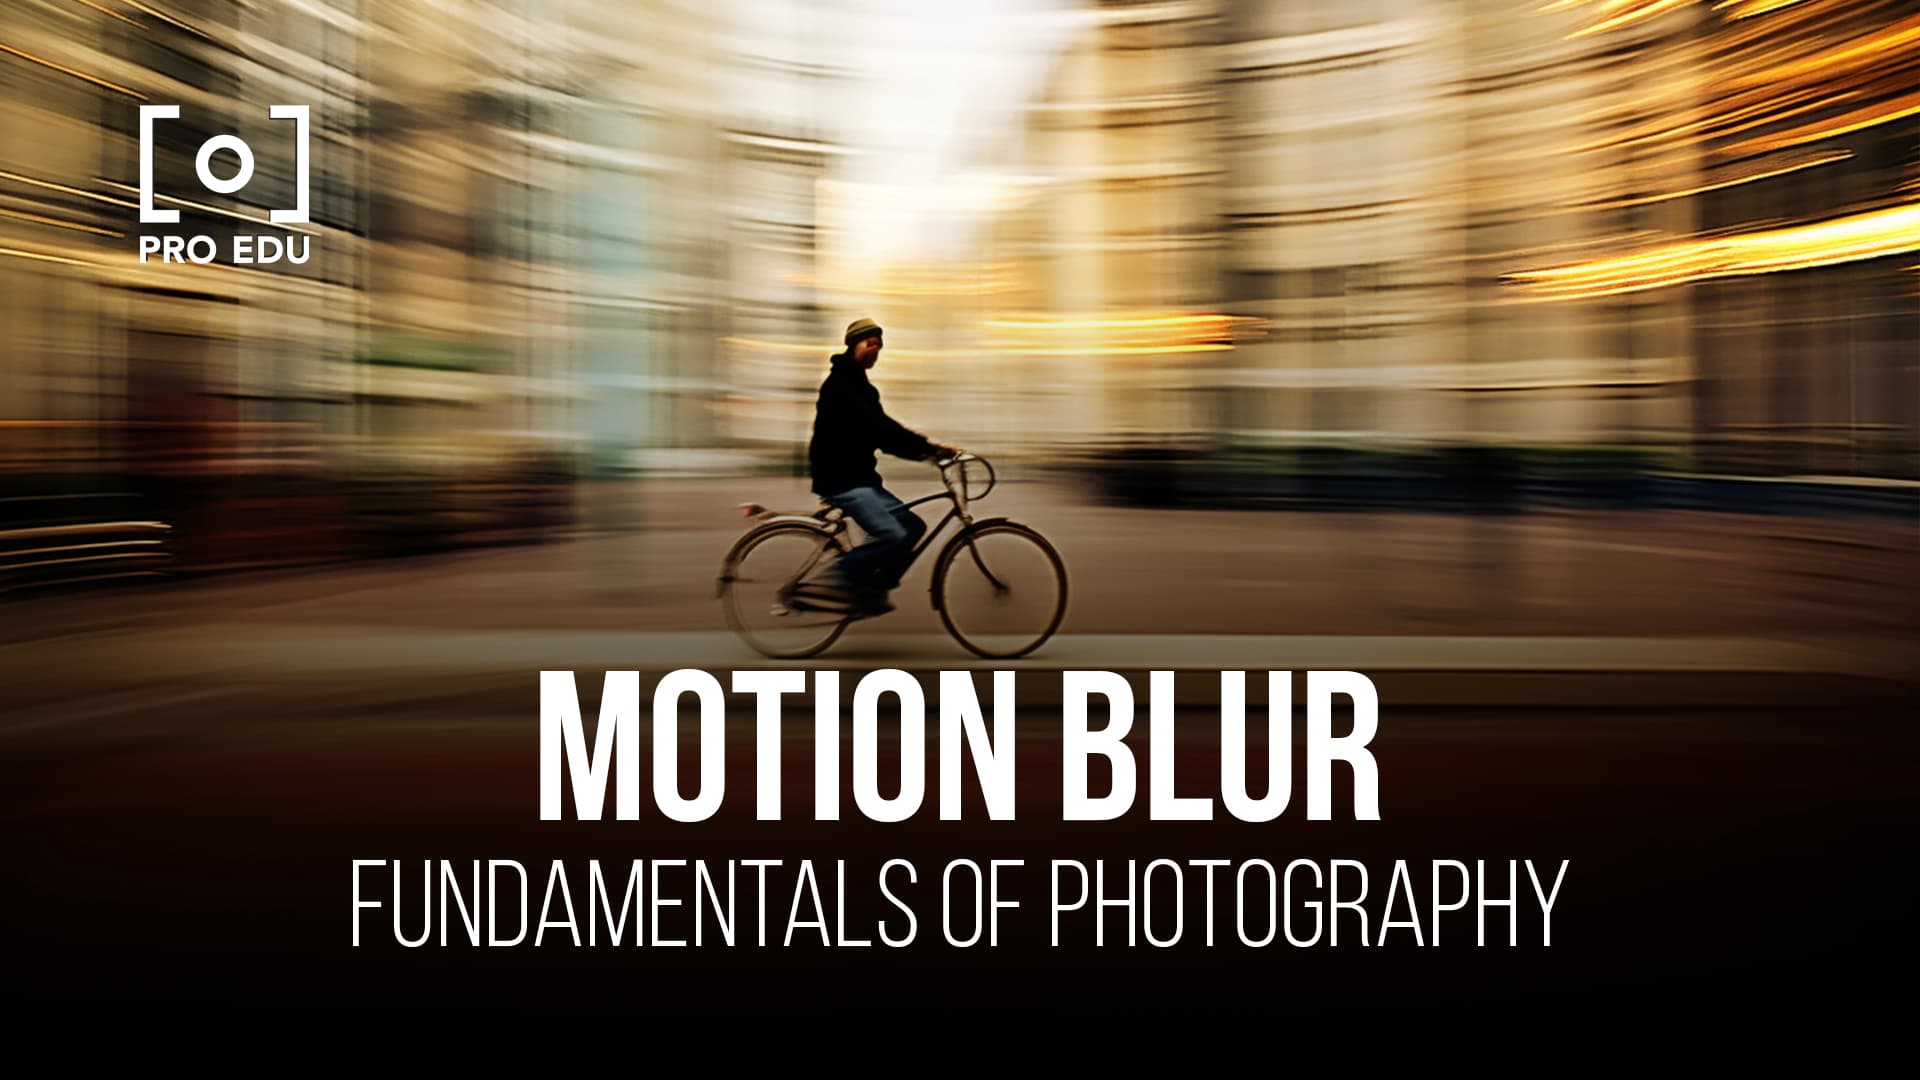 Capturing movement artistically with motion blur techniques in photography